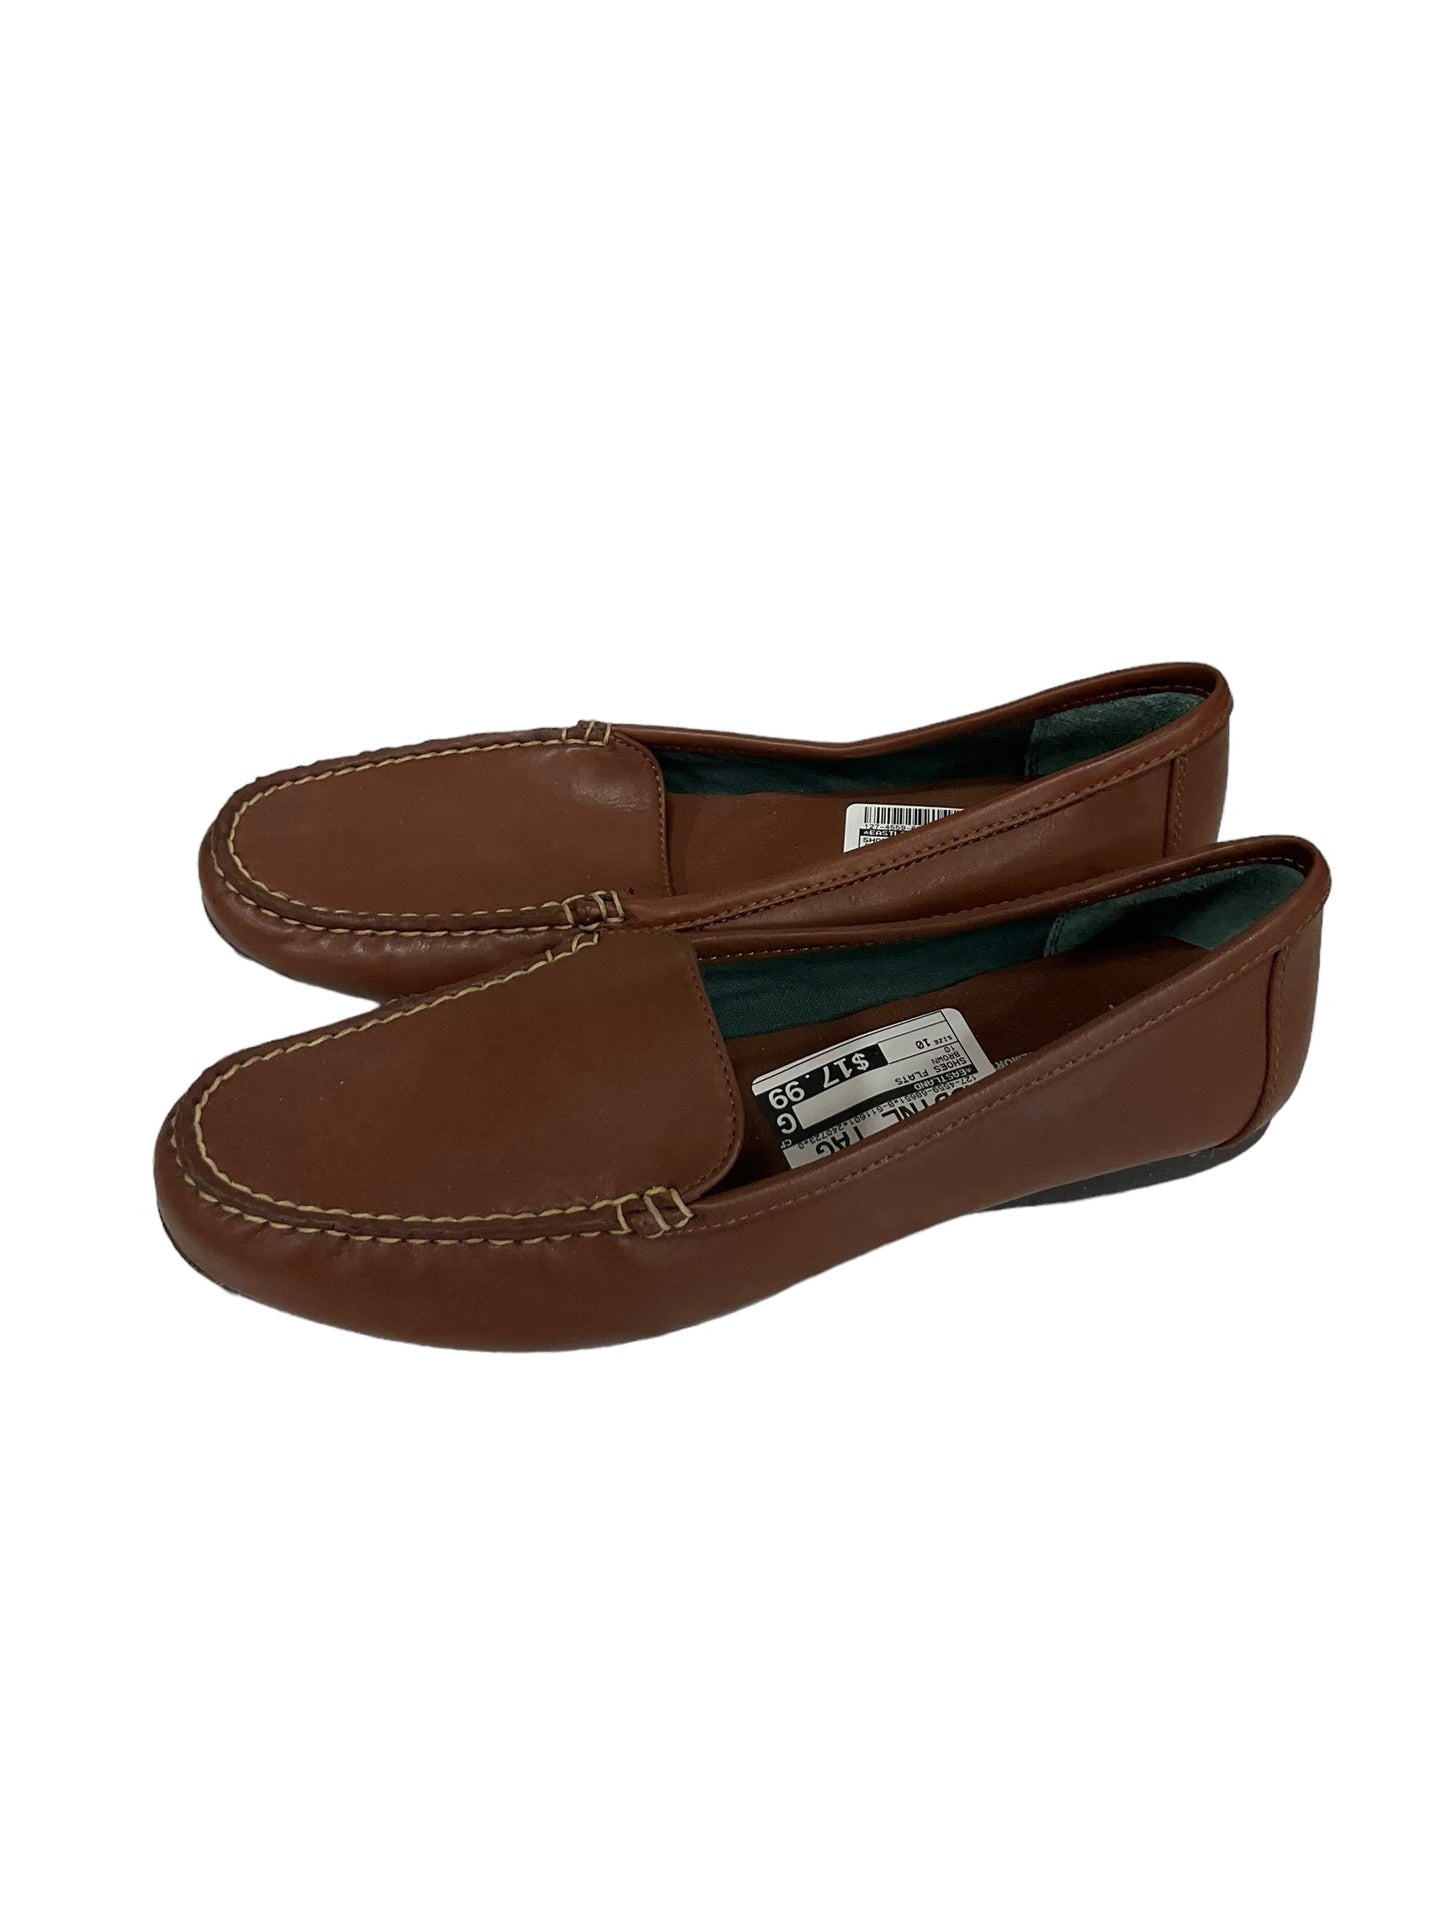 Brown Shoes Flats Eastland, Size 10